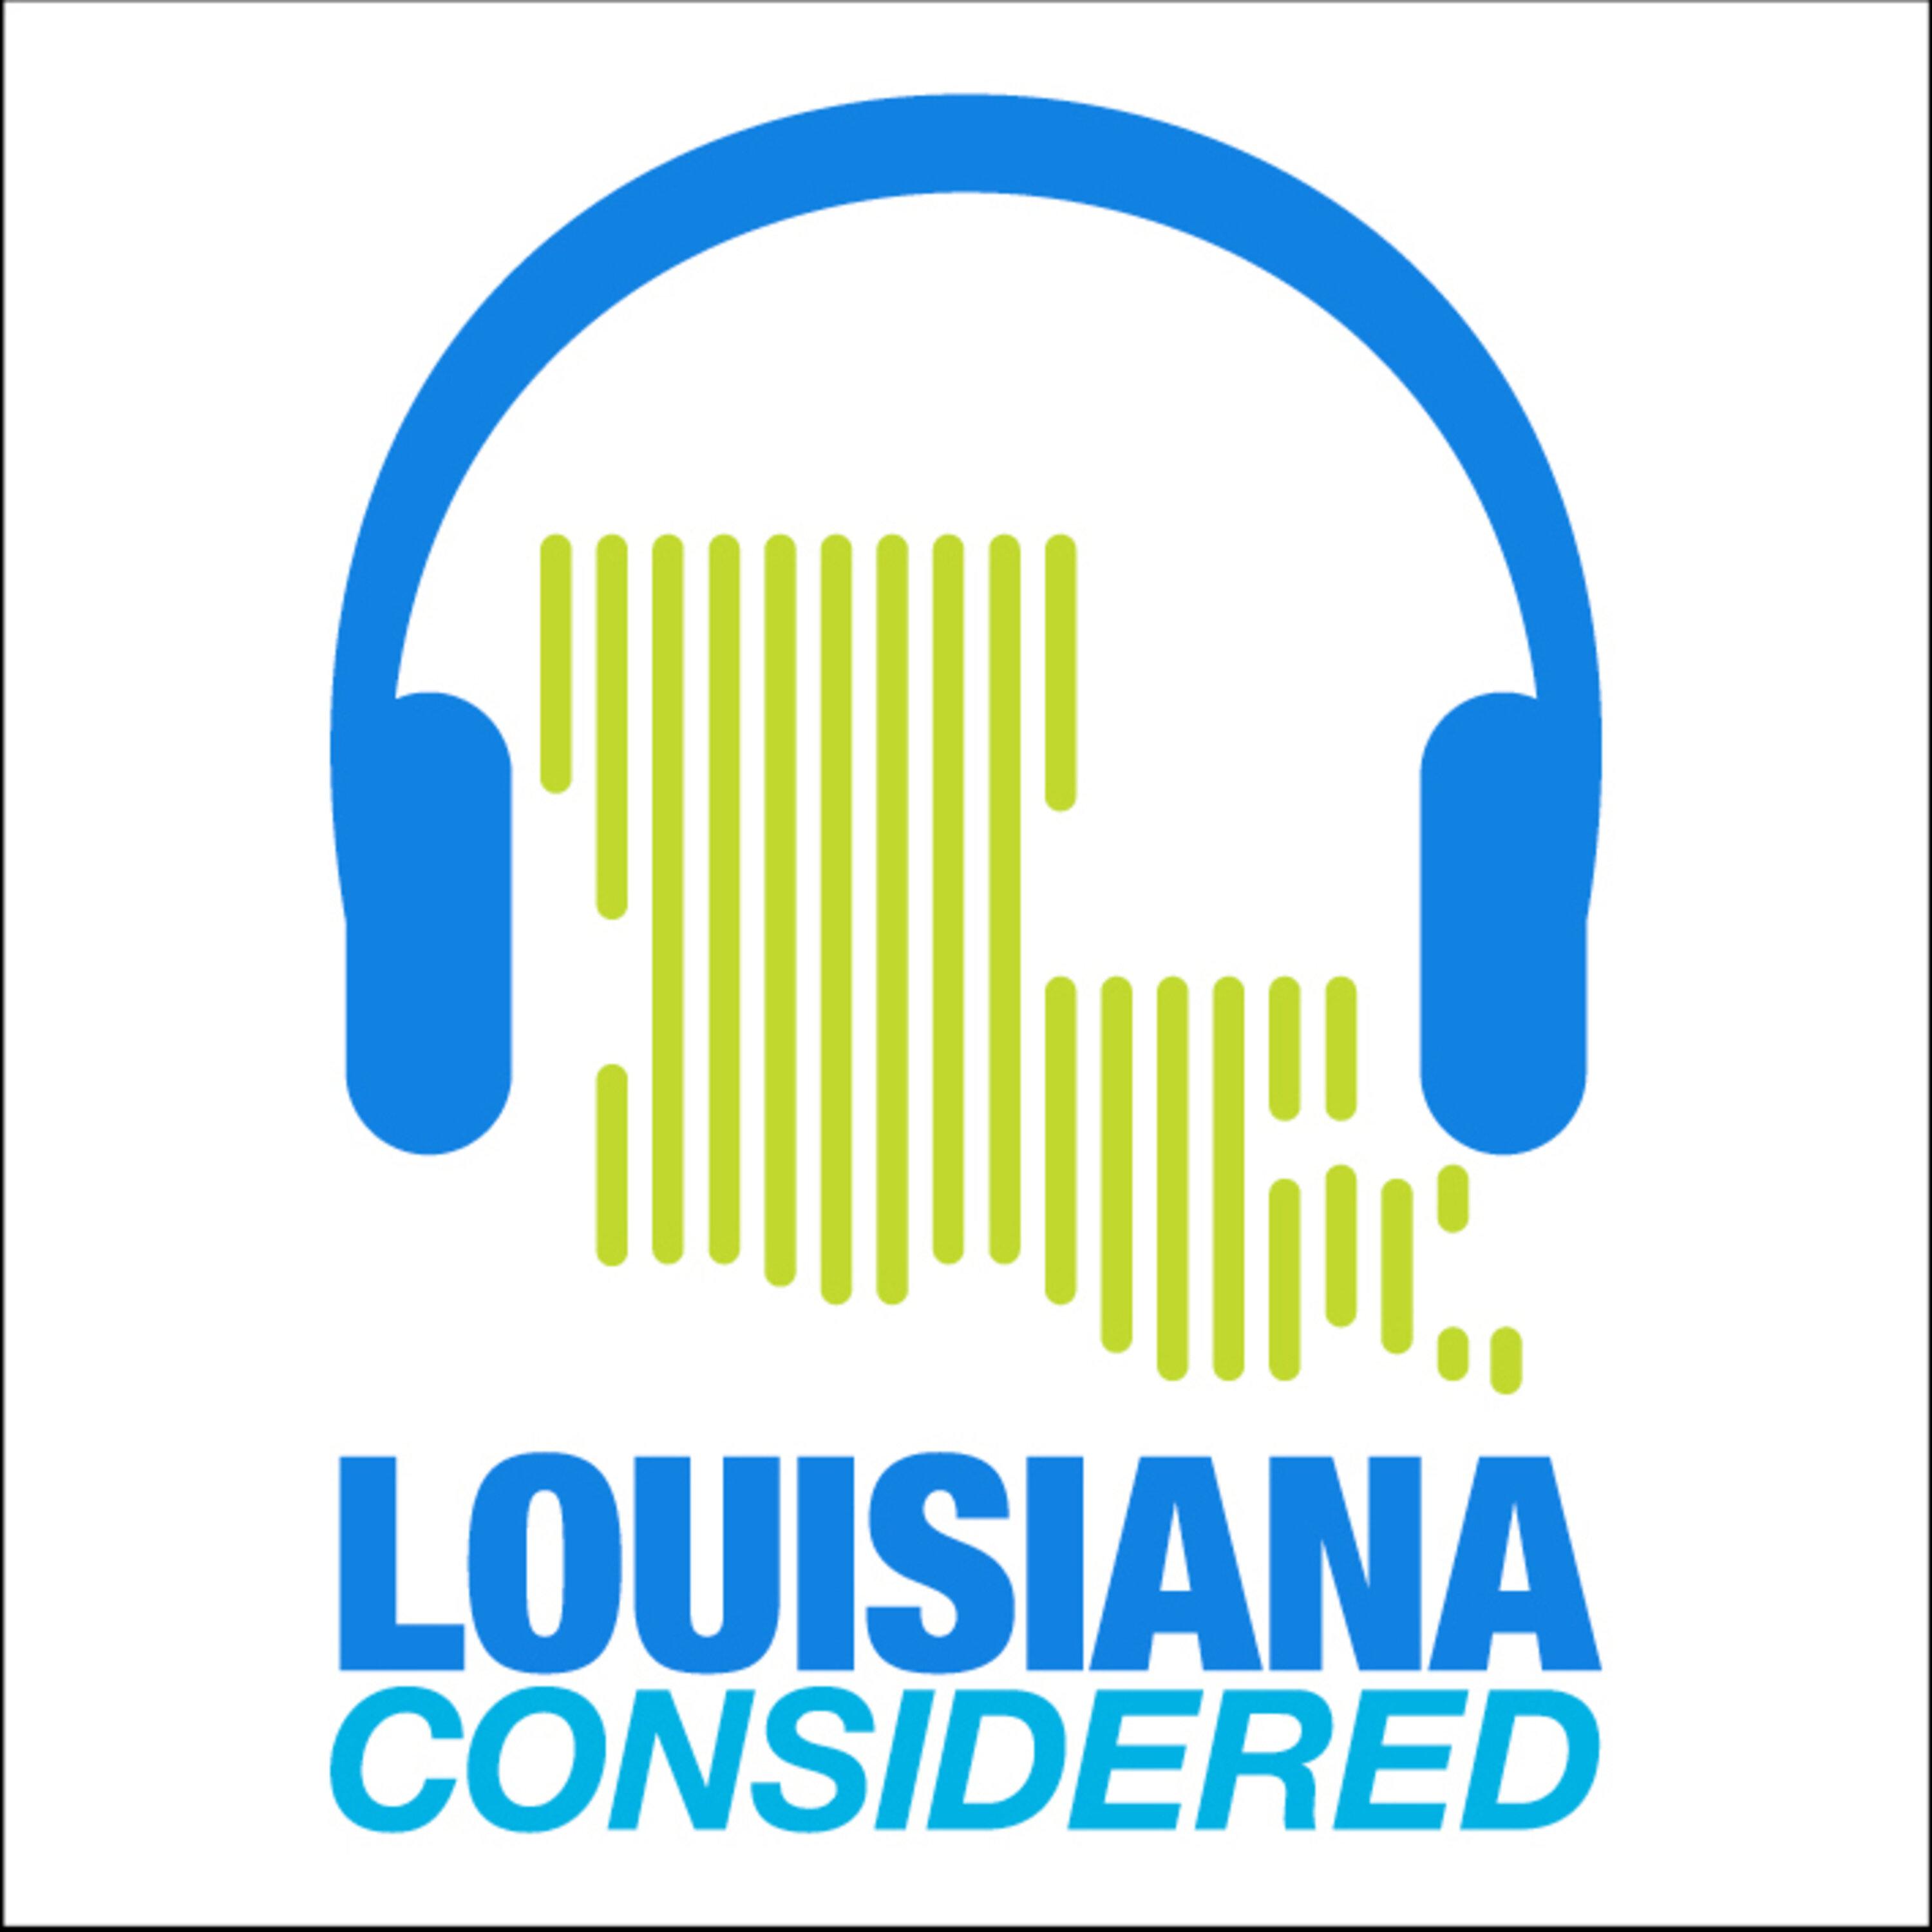 Thumbnail for "Louisiana Considered: The Chicago Defender’s Louisiana Coverage, LPO’s New Executive Director".